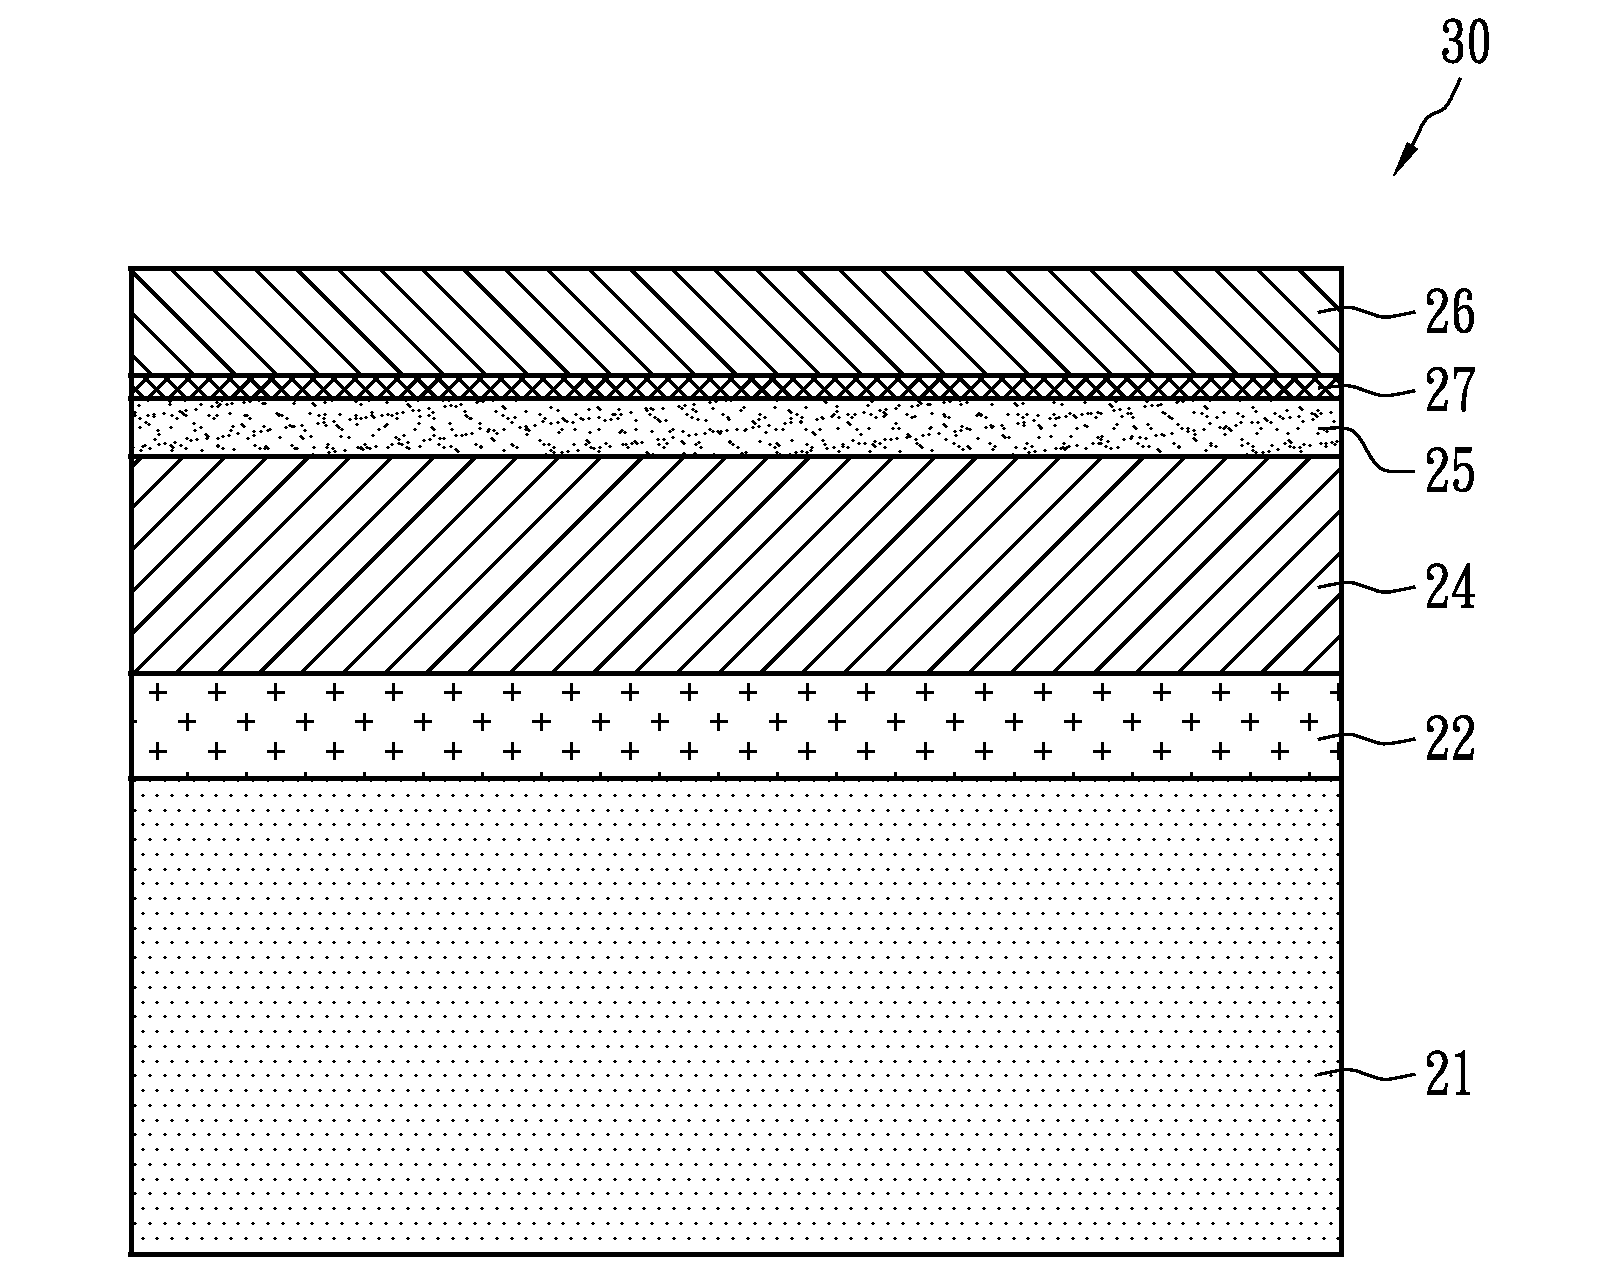 Photovoltaic cell structure